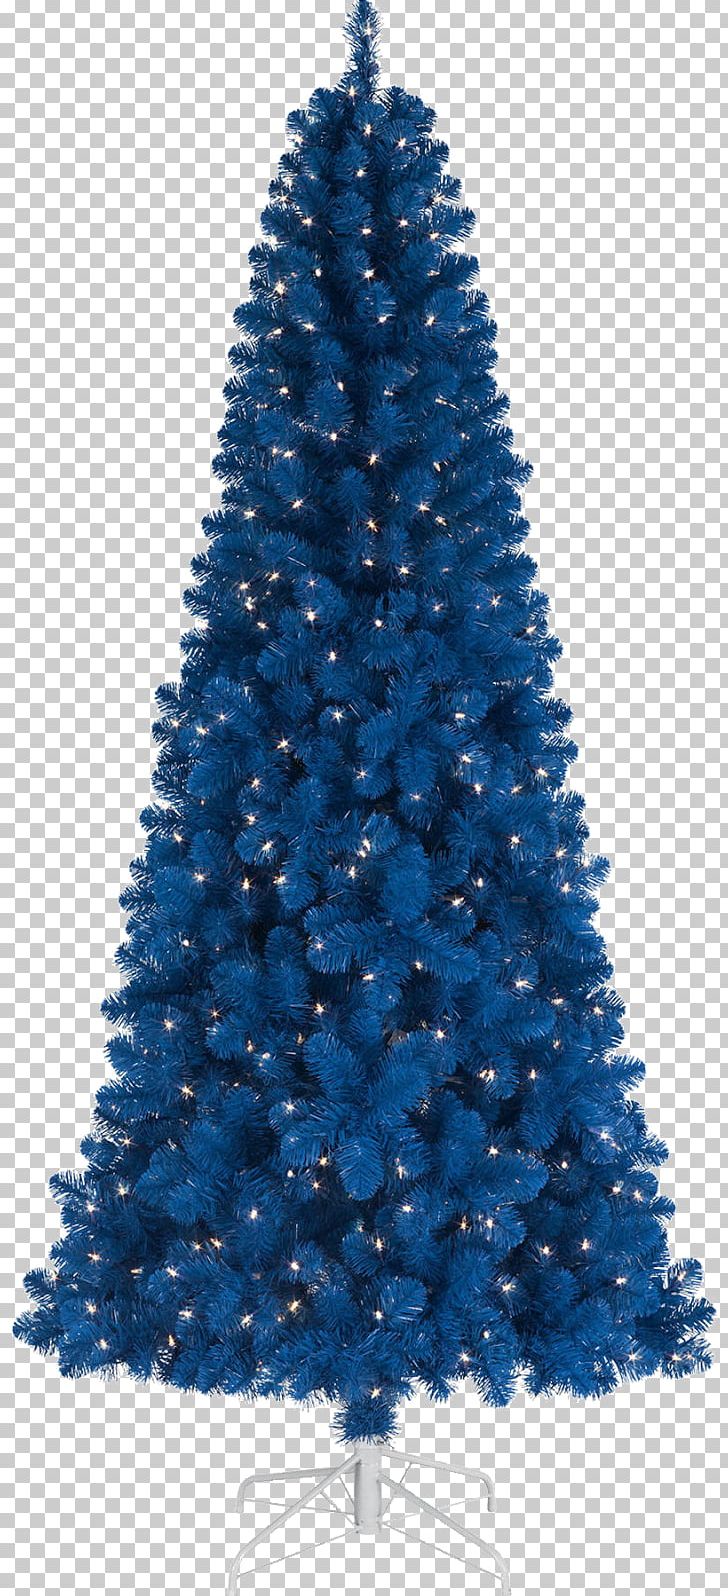 Artificial Christmas Tree Pre-lit Tree Christmas Lights PNG, Clipart, Artificial Christmas Tree, Blue, Christmas, Christmas Decoration, Christmas Lights Free PNG Download